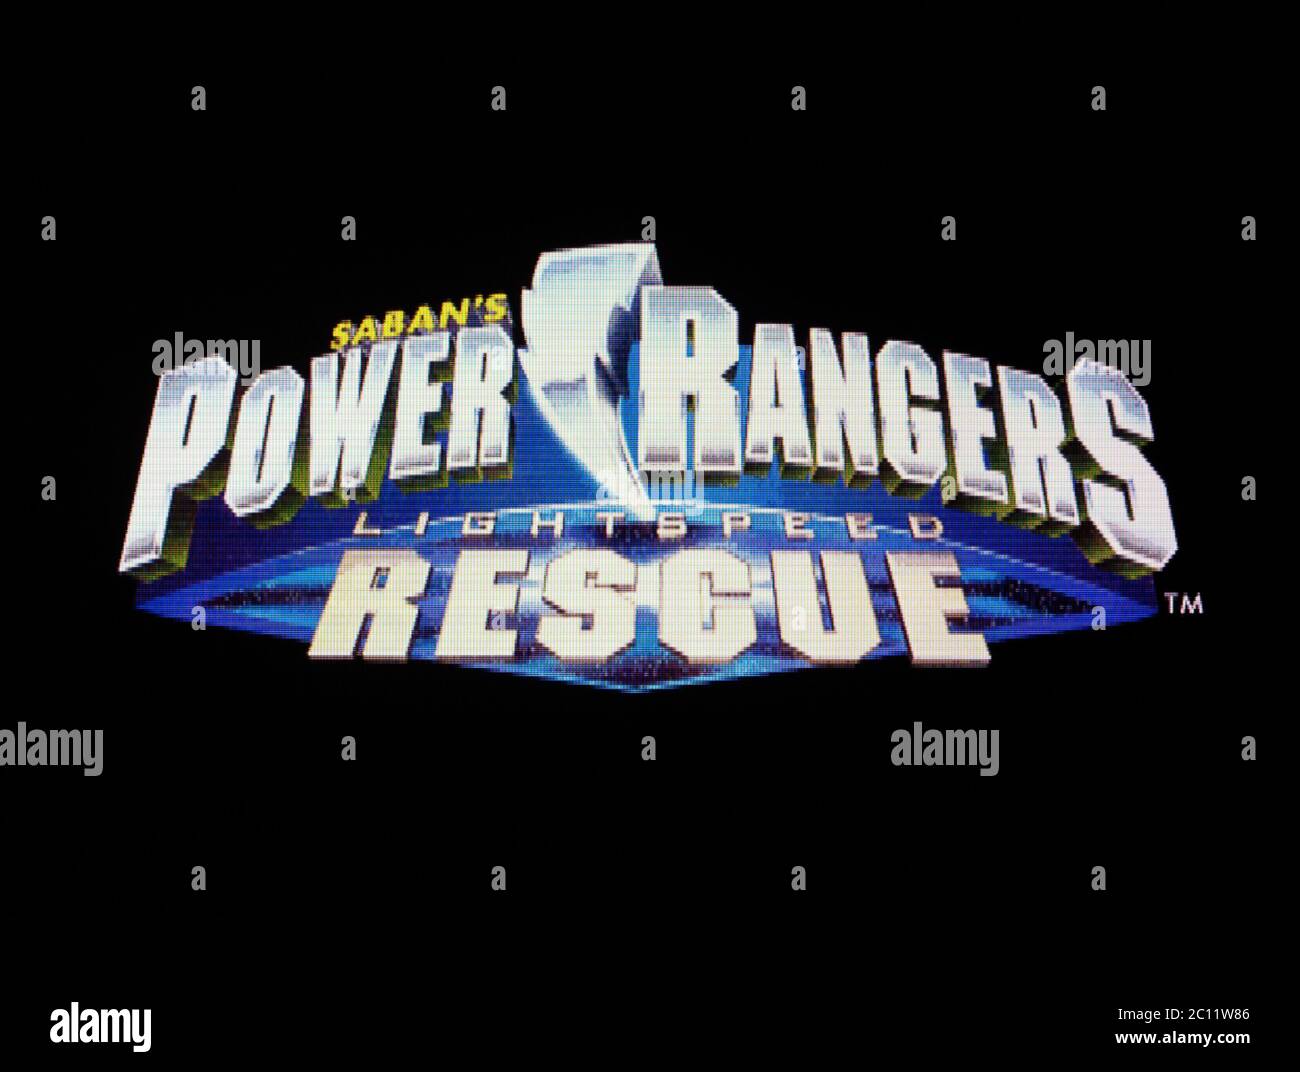 Saban's Power Rangers Lightspeed Rescue - Nintendo 64 Videogame  - Editorial use only Stock Photo